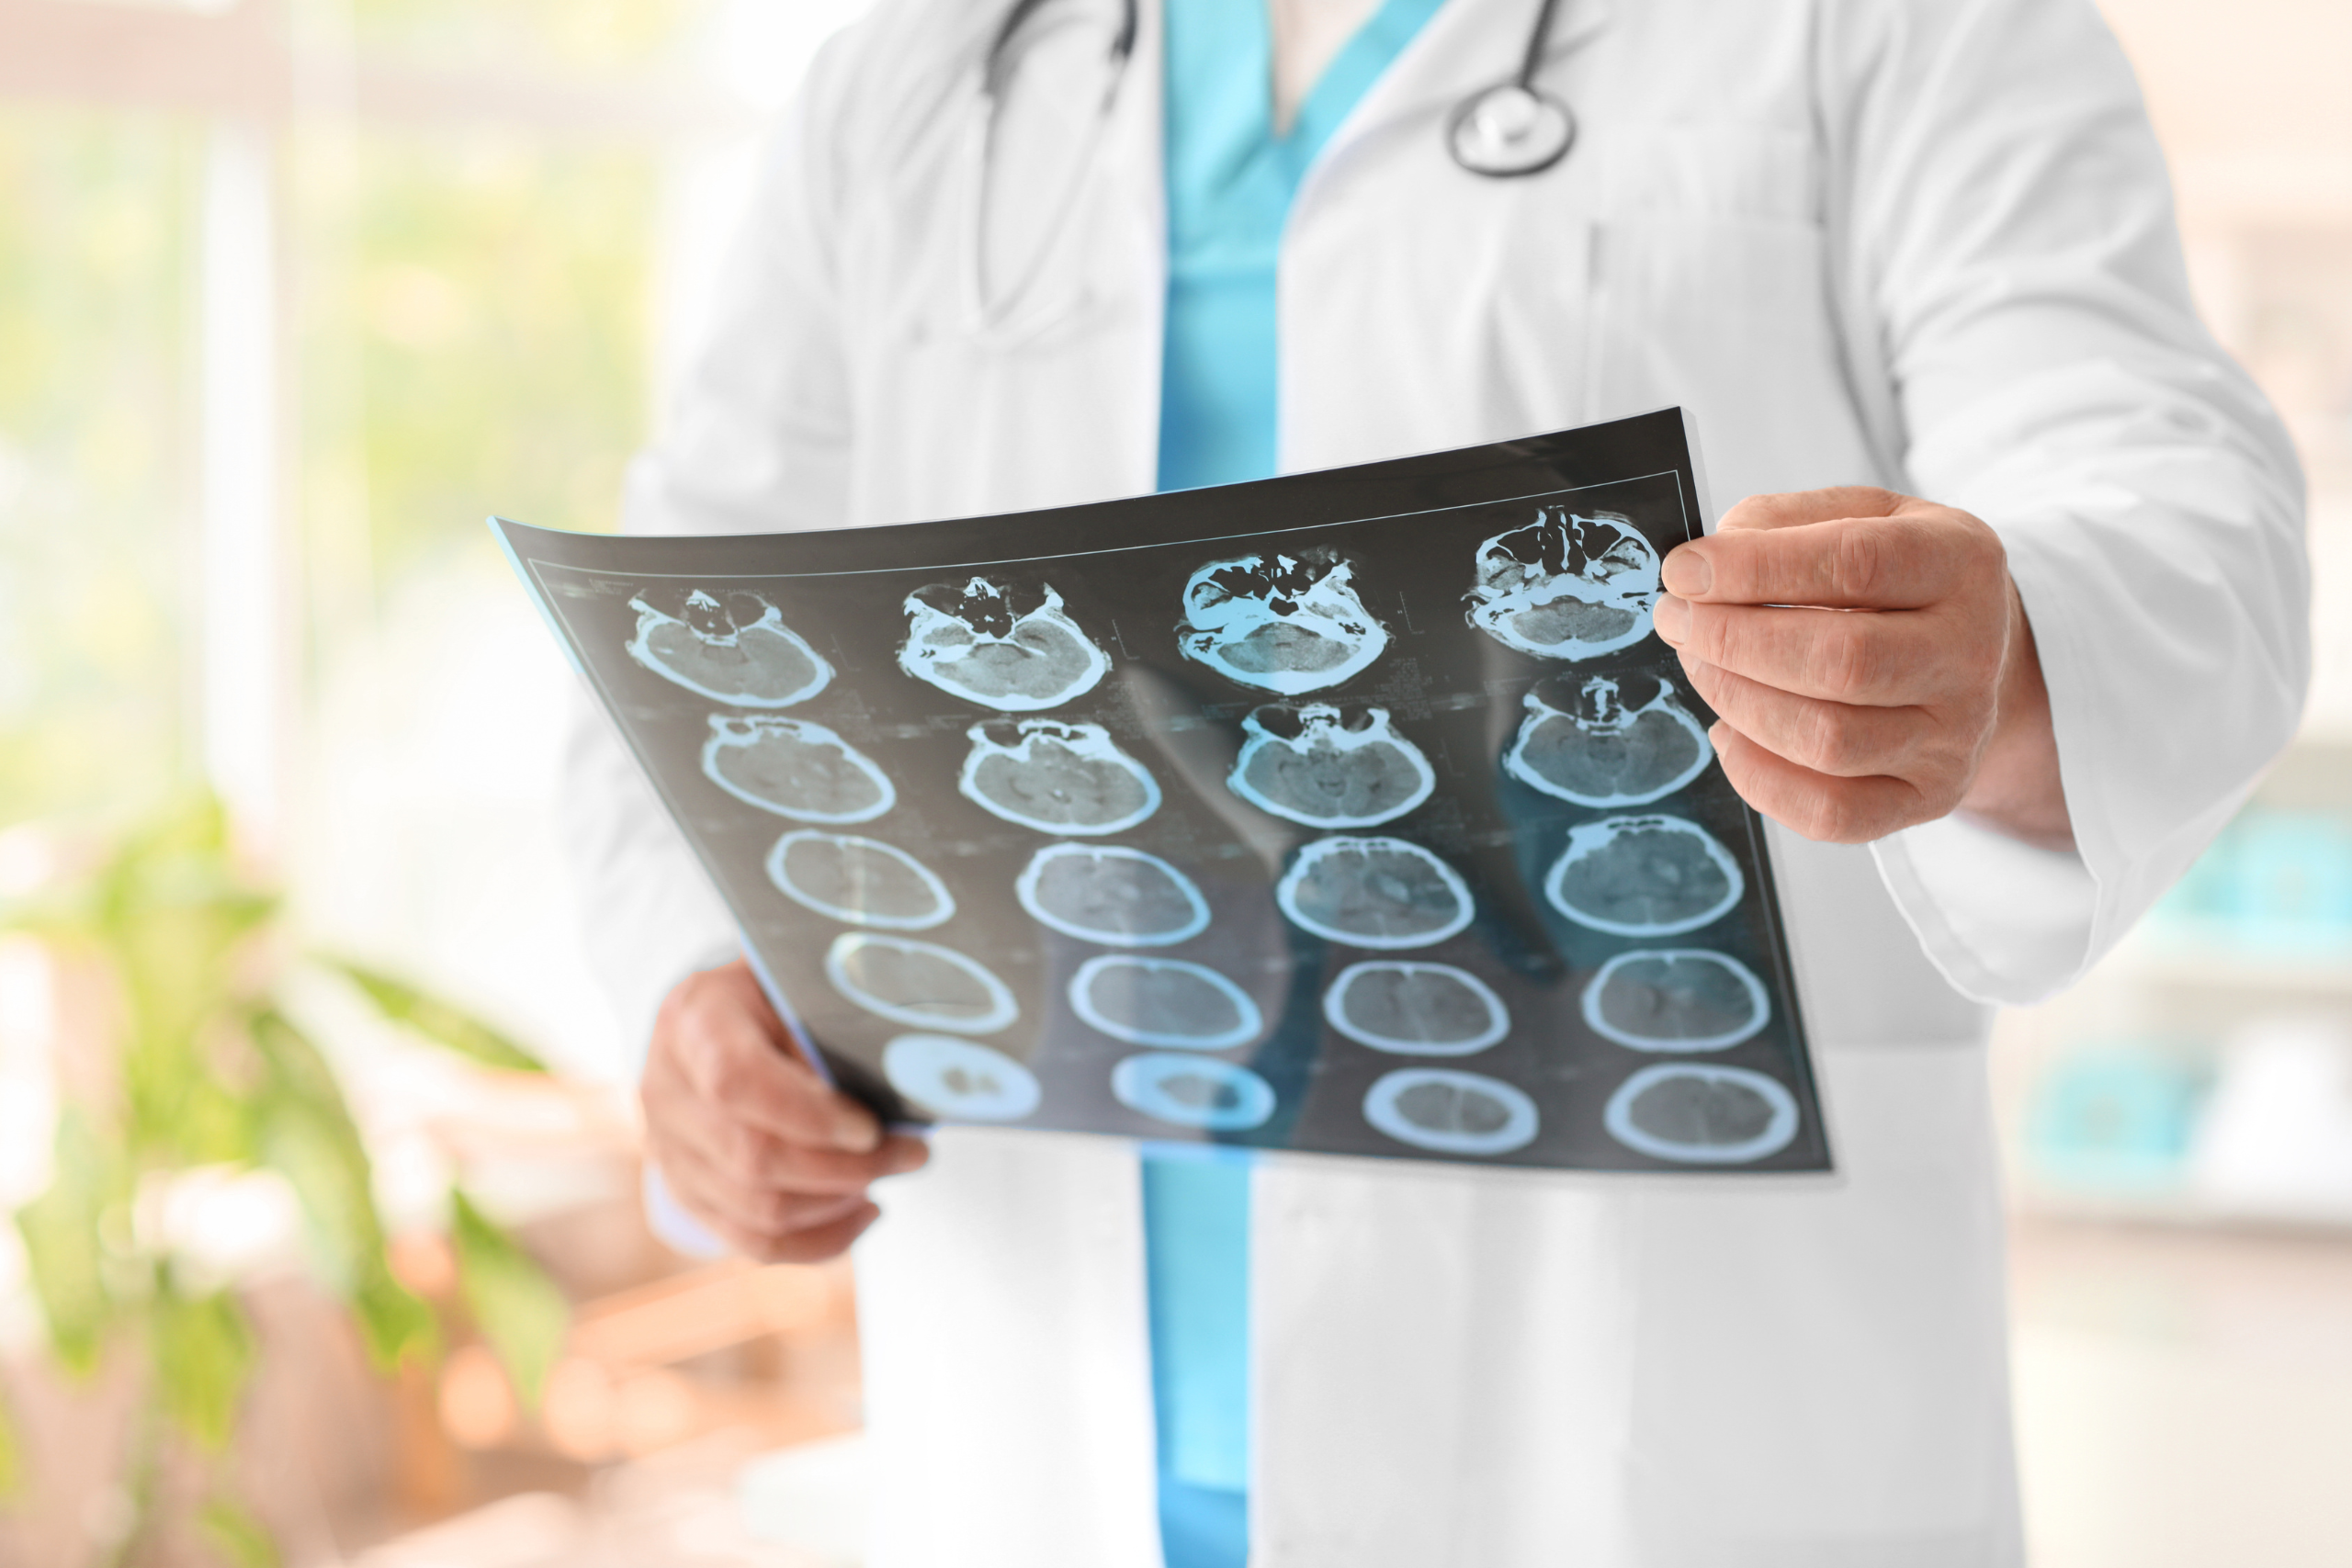 A medical professional in a white coat holding and examining a series of CT scan images, possibly reviewing a patient's brain scans for diagnosis.